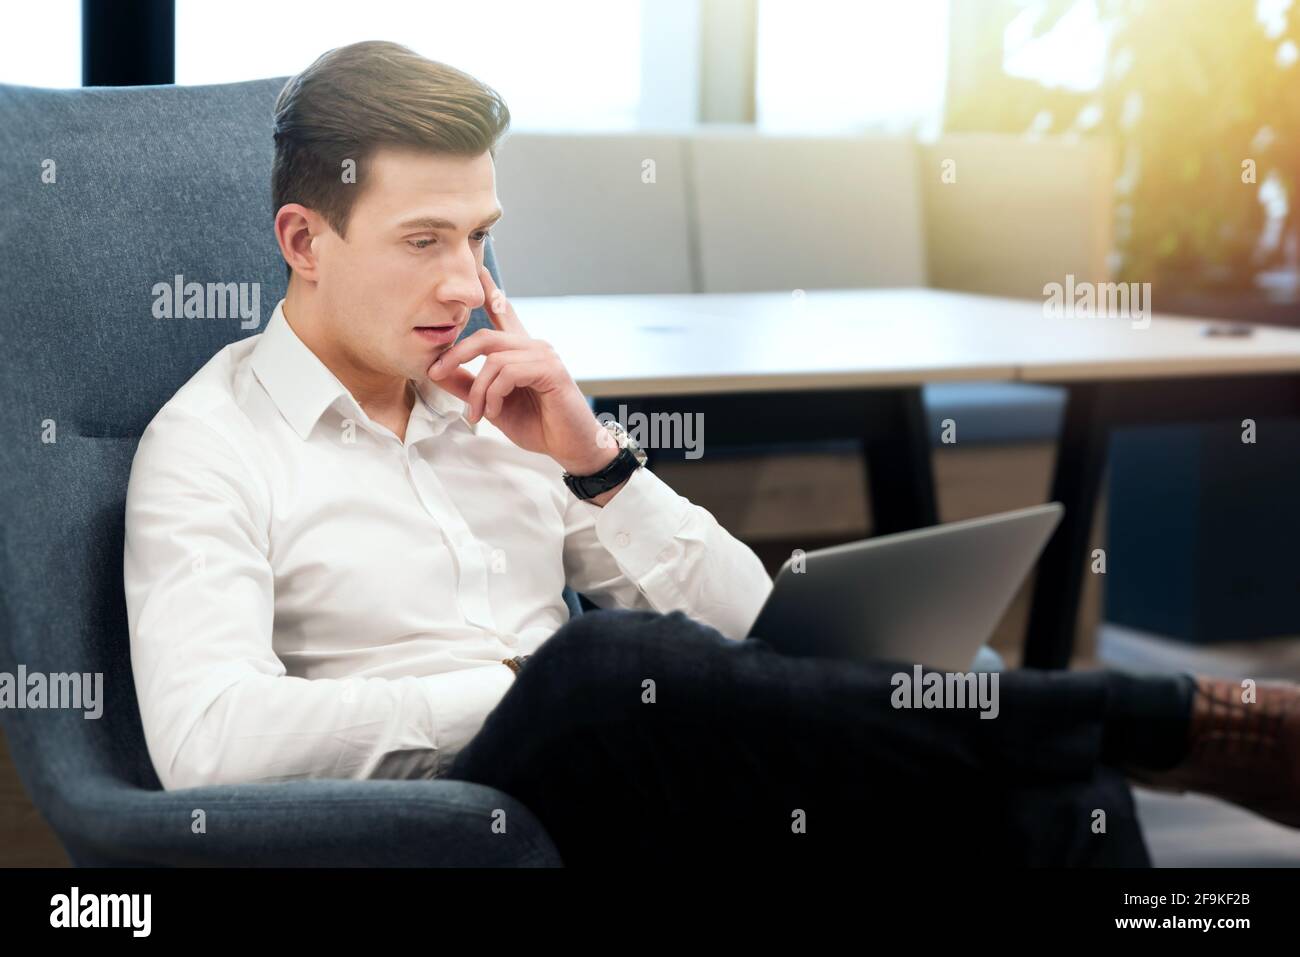 Businessman working in the office. Mmanager focused on work Stock Photo